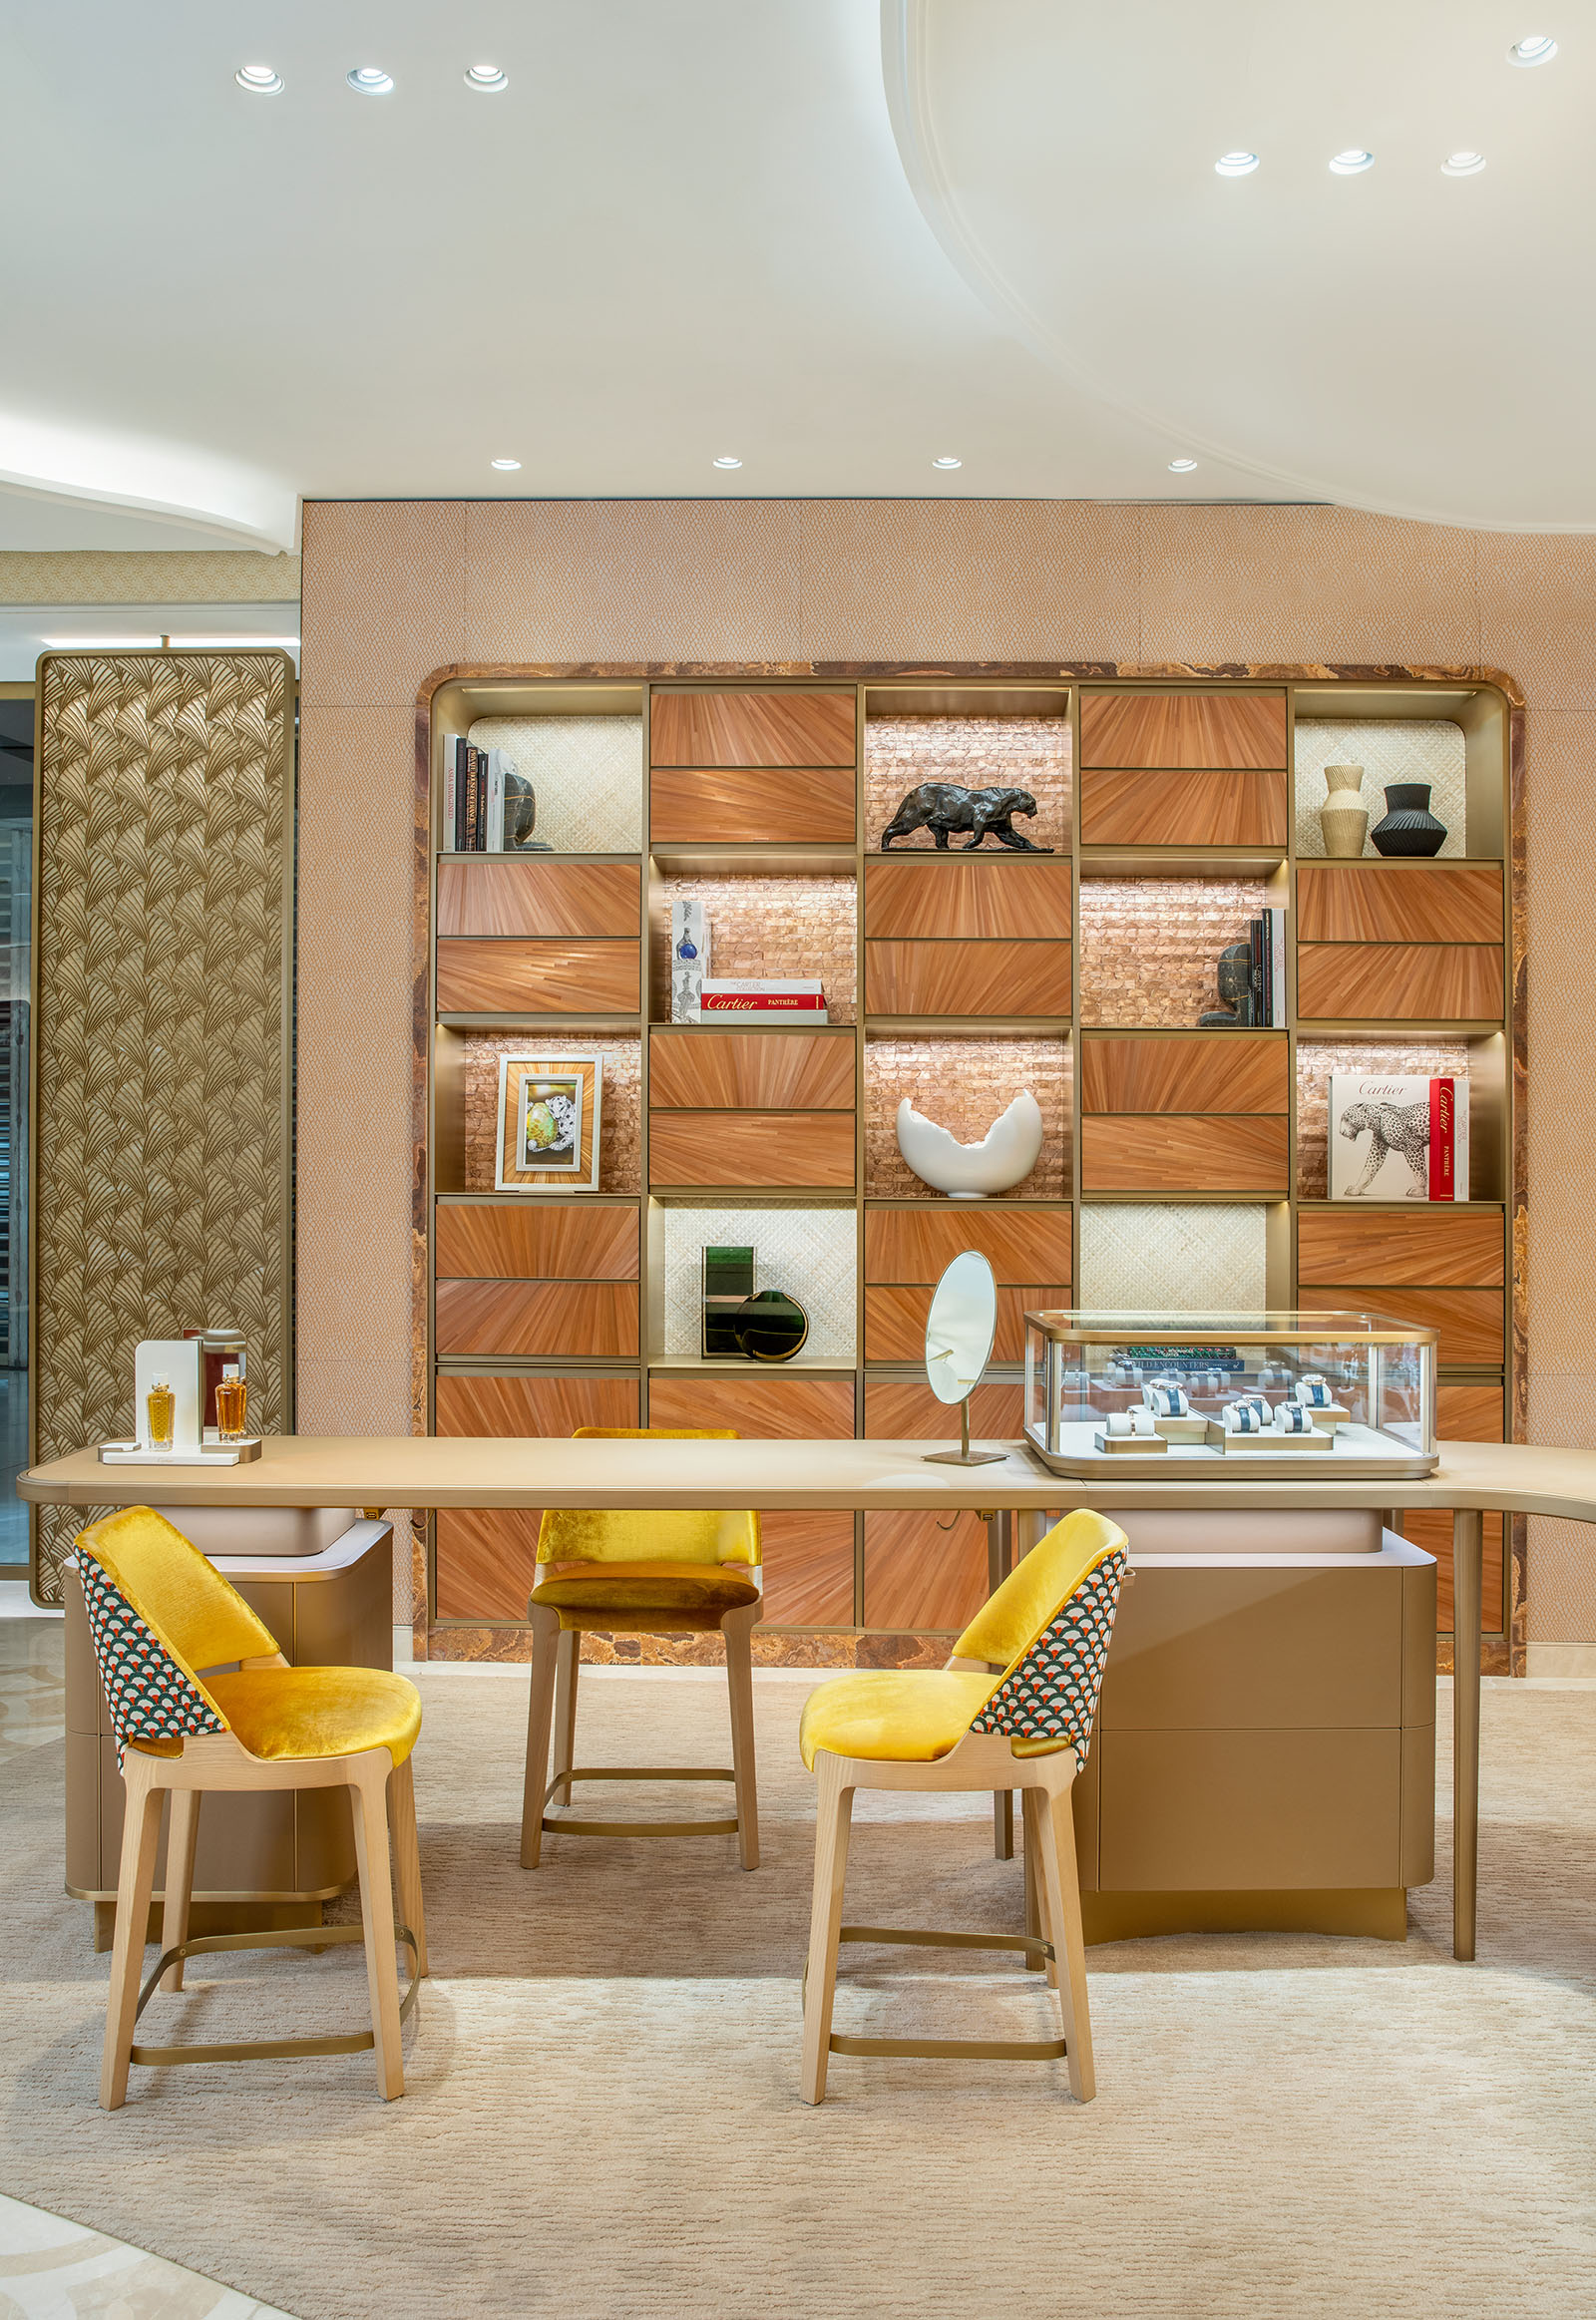 Cartier's new flagship boutique at Greenbelt 3 is now open